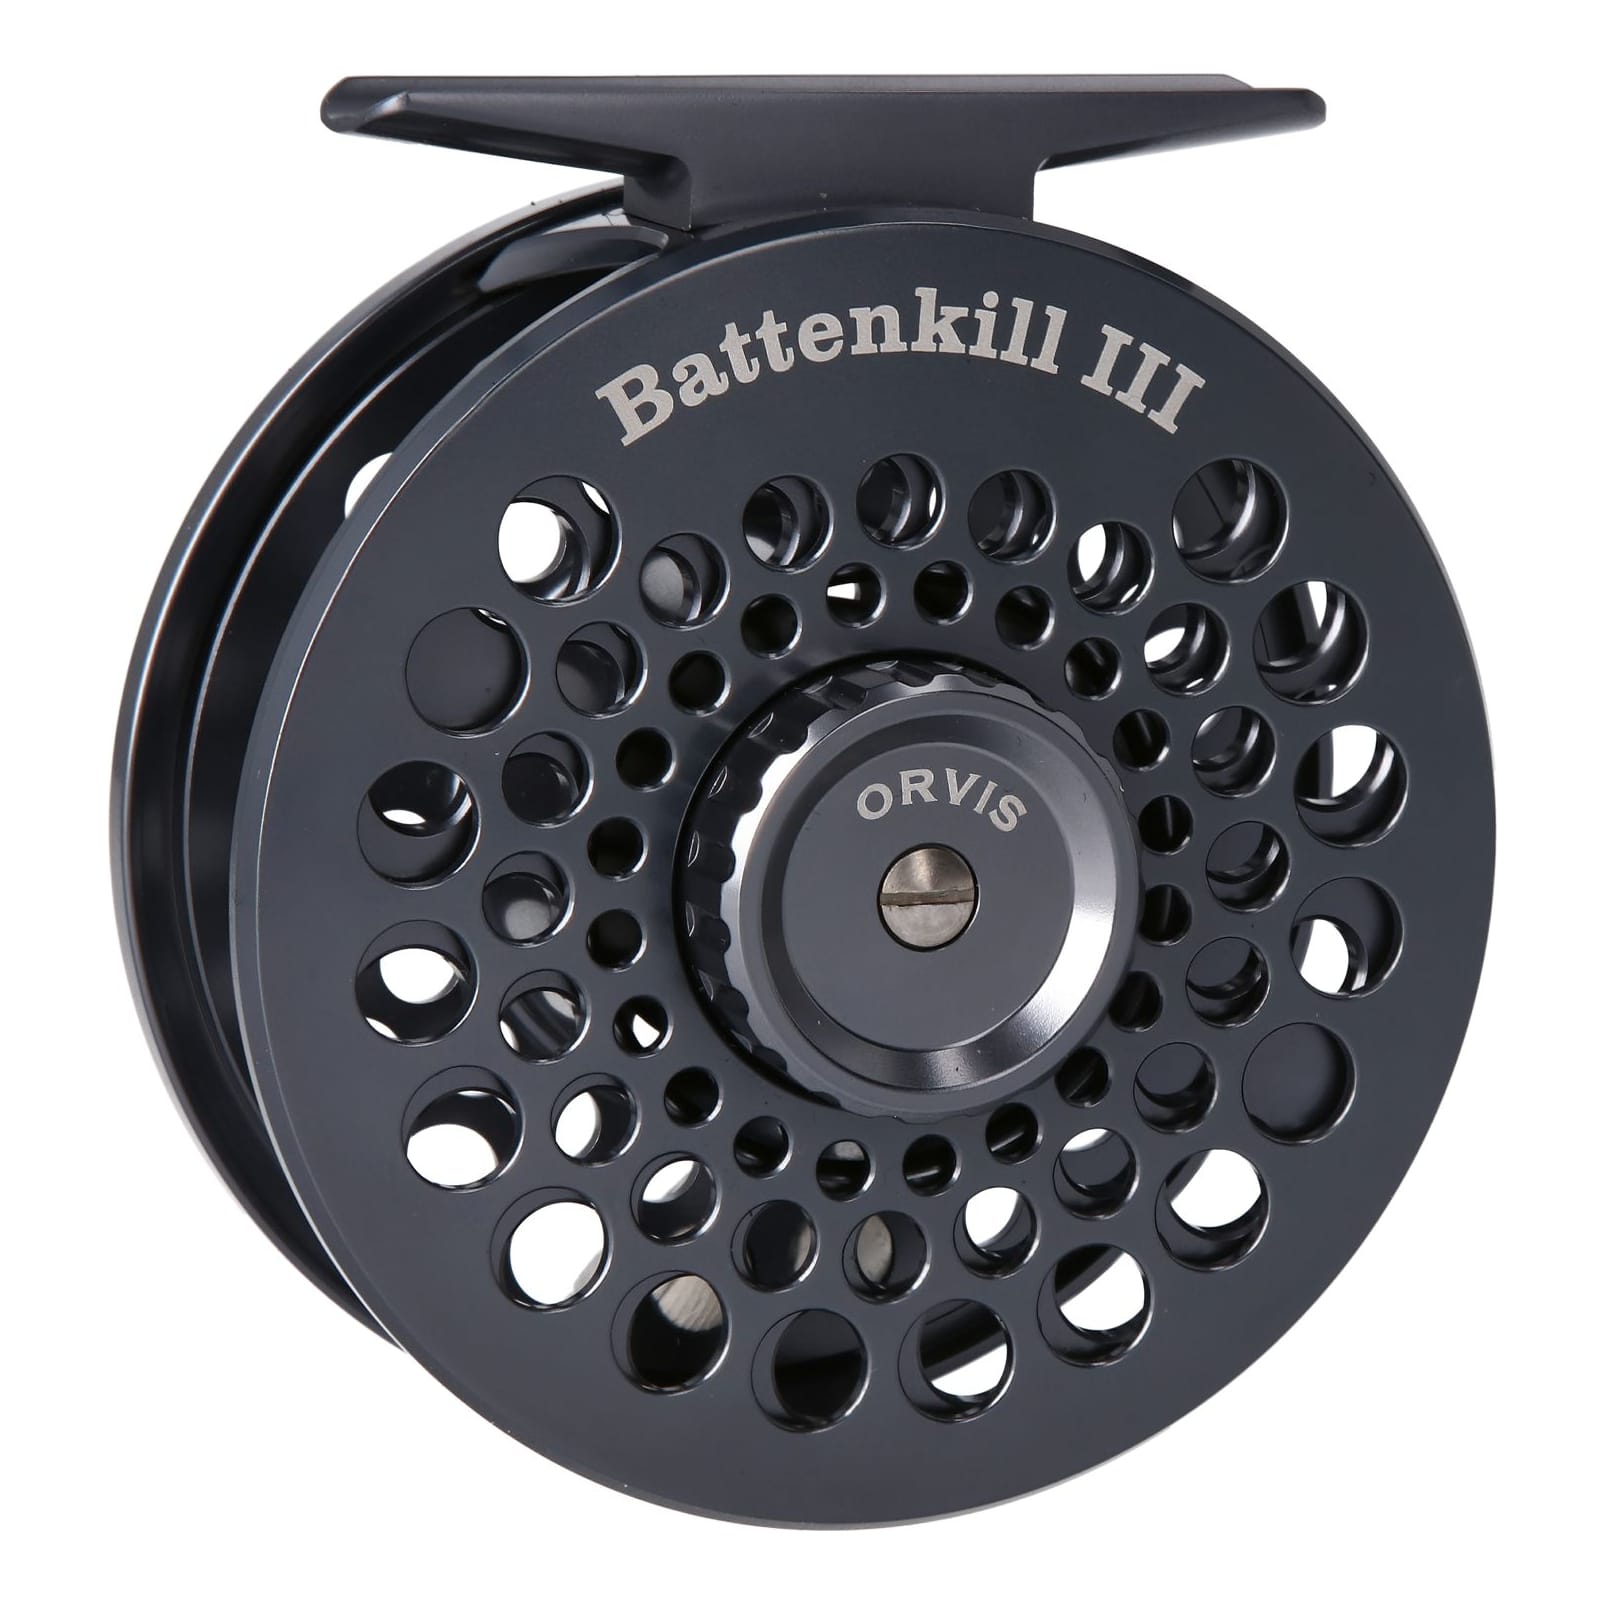 A1 stunning orvis battenkill disc drag 7/8 trout fly fishing reel